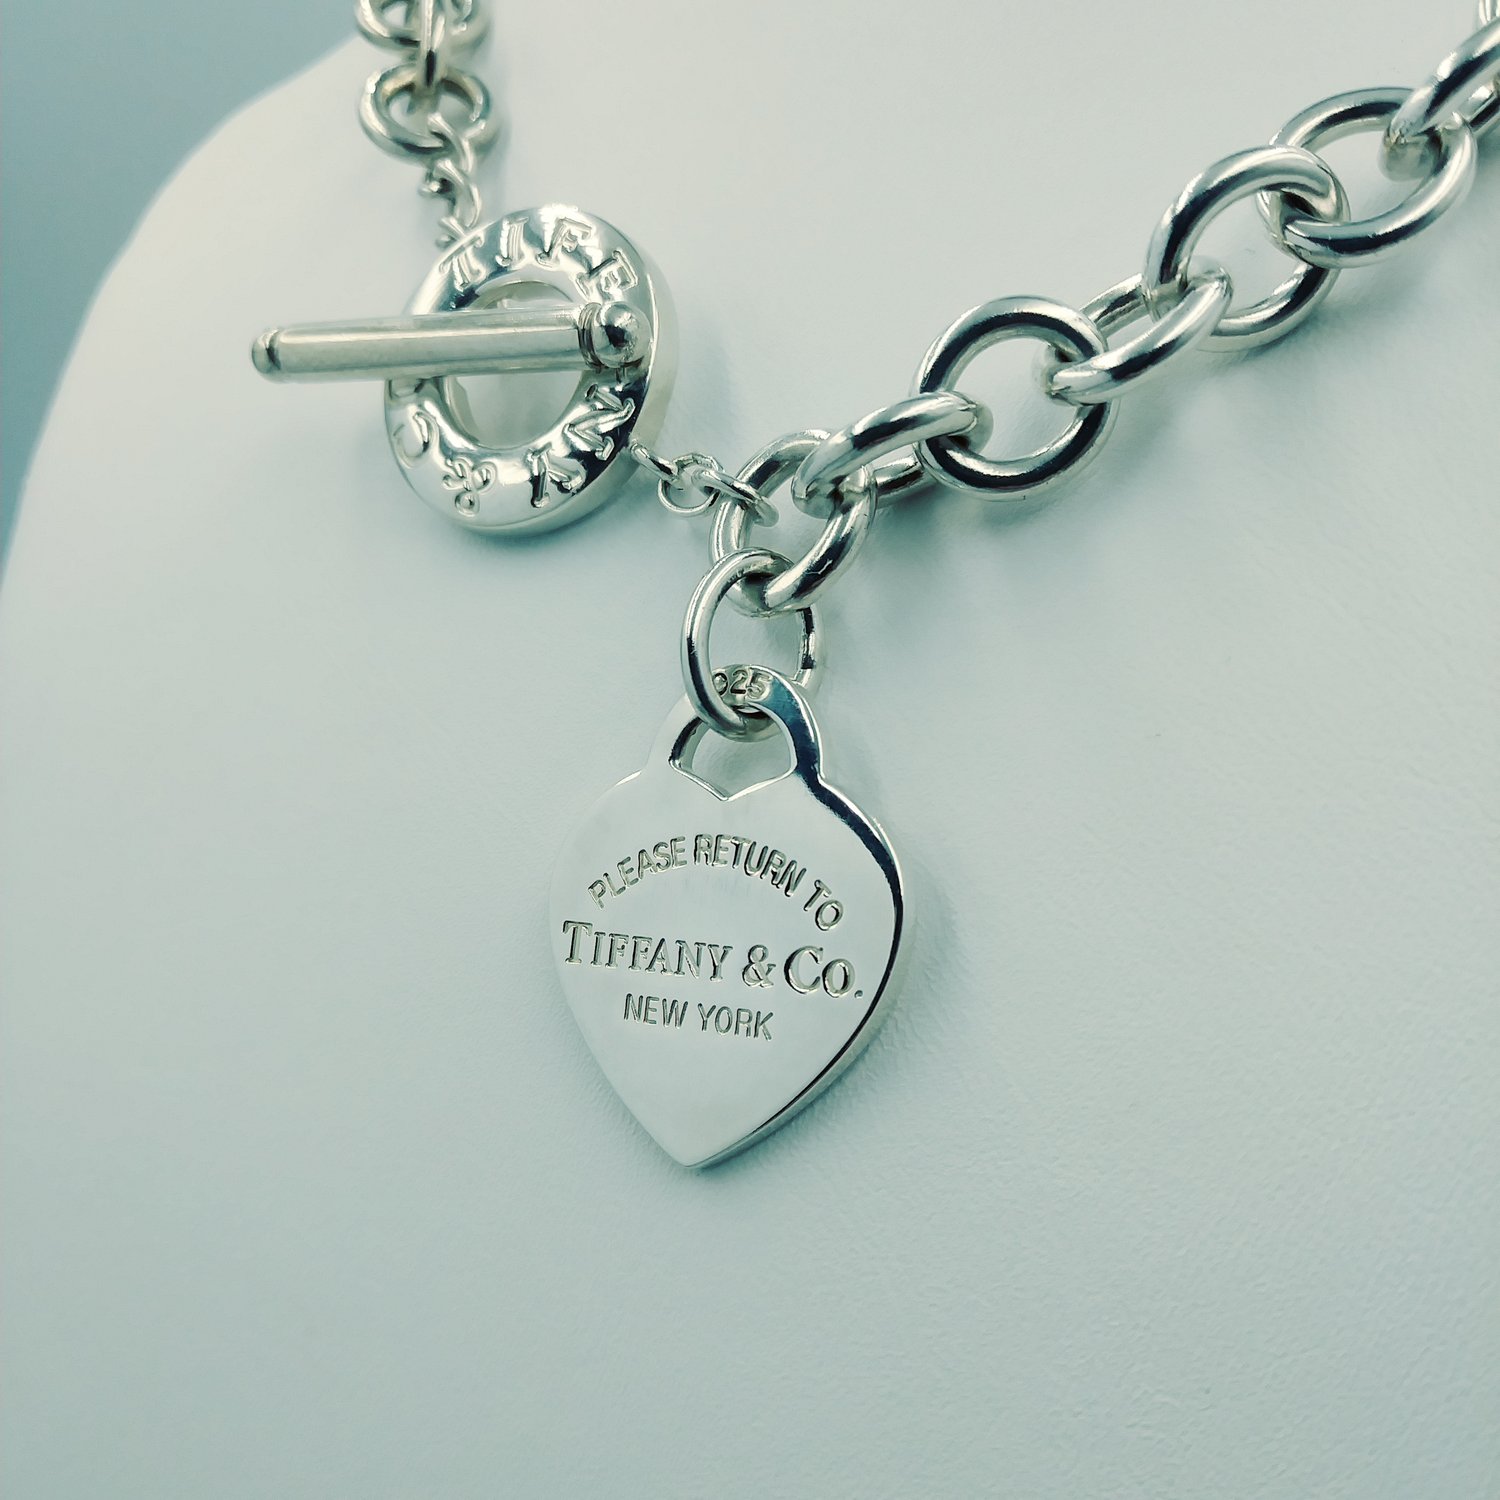 Tiffany & Co. 20″ Please Return To - Sterling Silver Heart Tag Toggle  Necklace